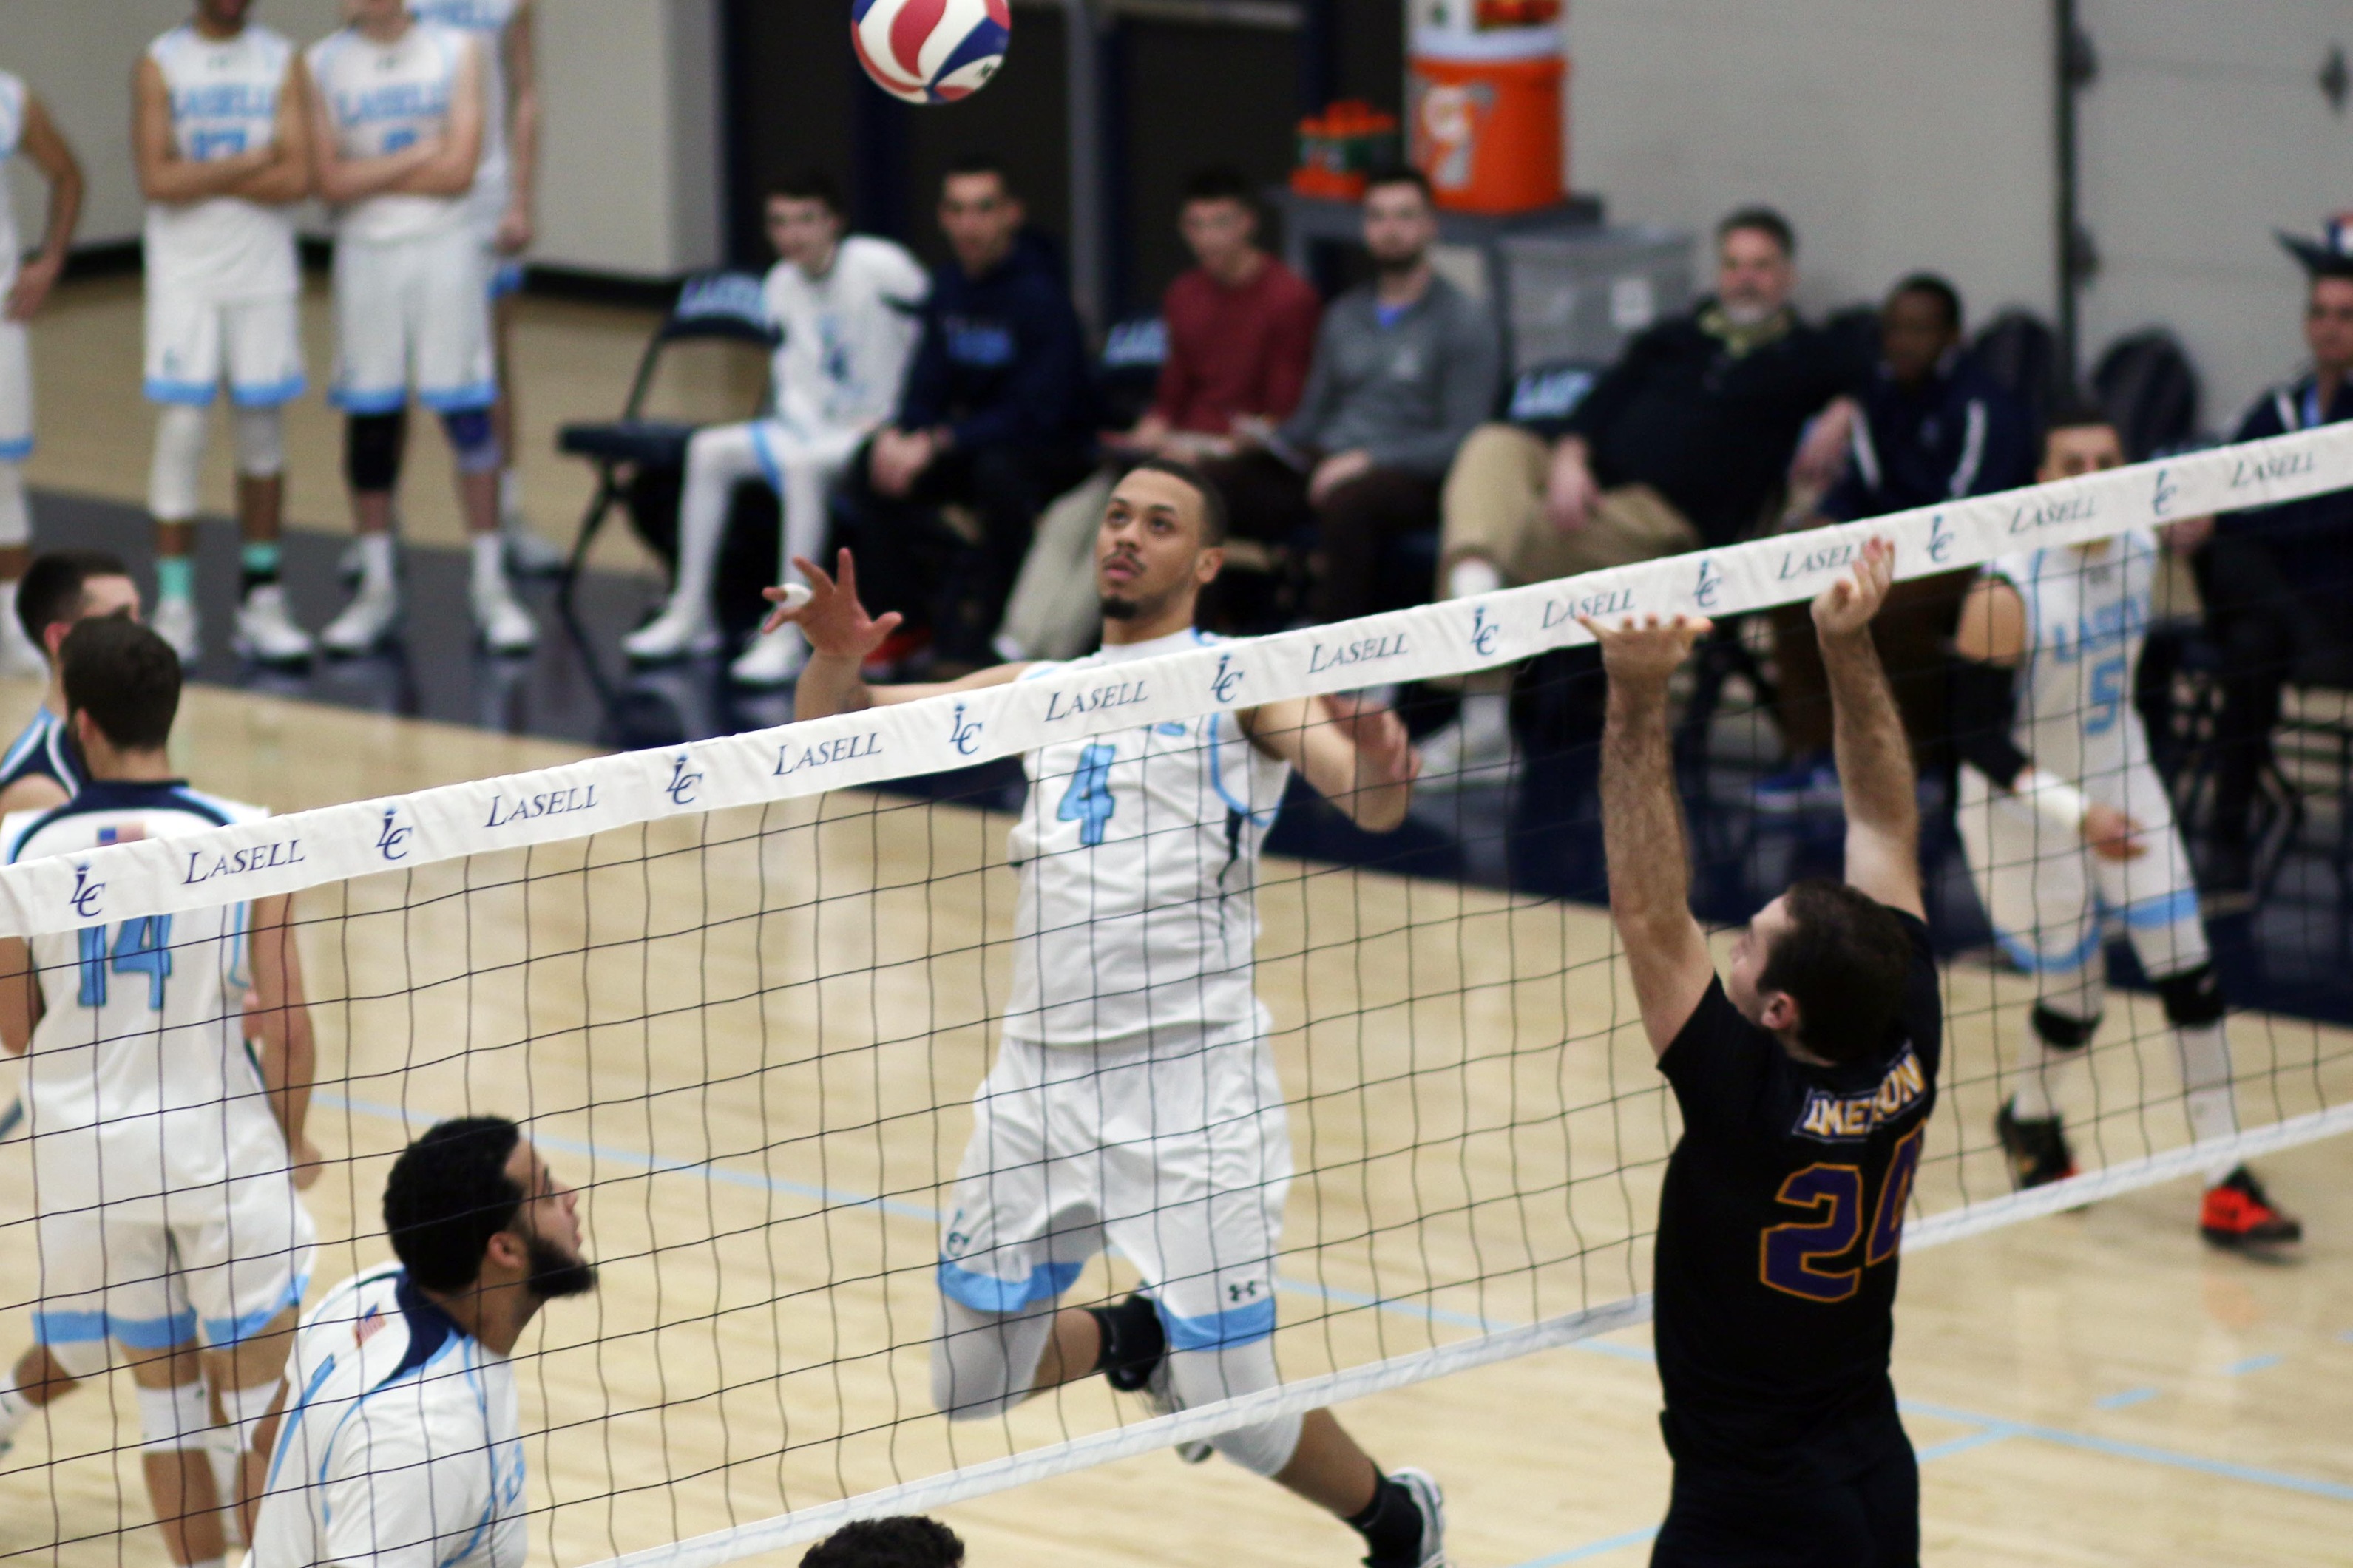 Lasell Men’s Volleyball upsets Wentworth in regular season finale